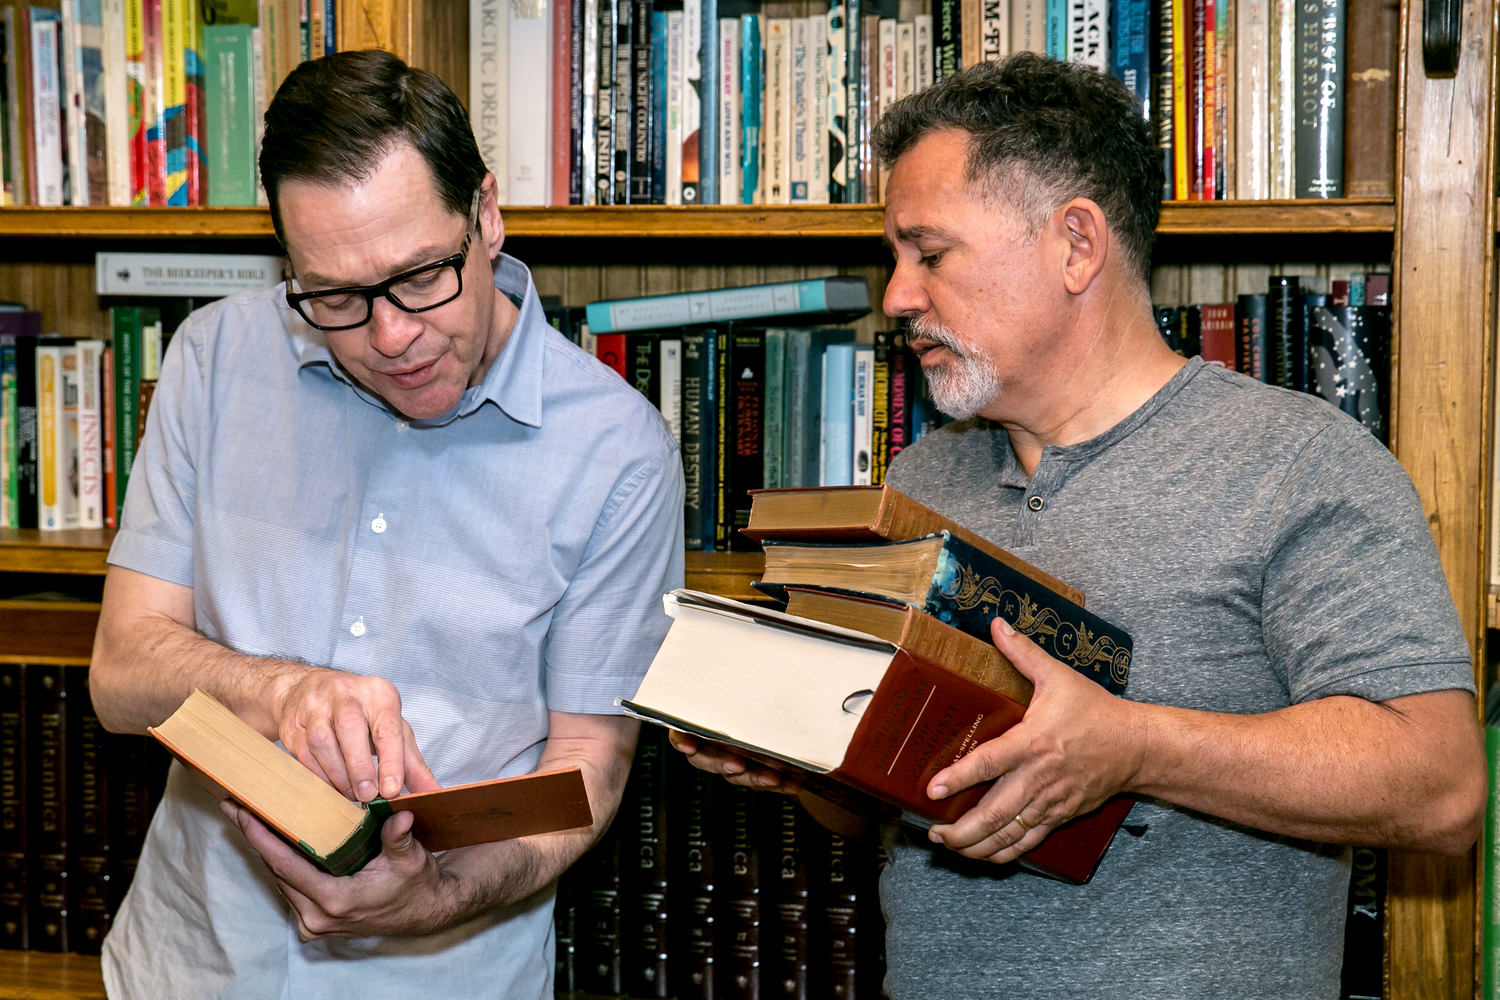 French Stewart and Steve Apostolina star in this play about a rare book dealer's desperate scheme to avoid bankruptcy goes shockingly awry in this darkly funny literary thriller with a surprise twist. 1